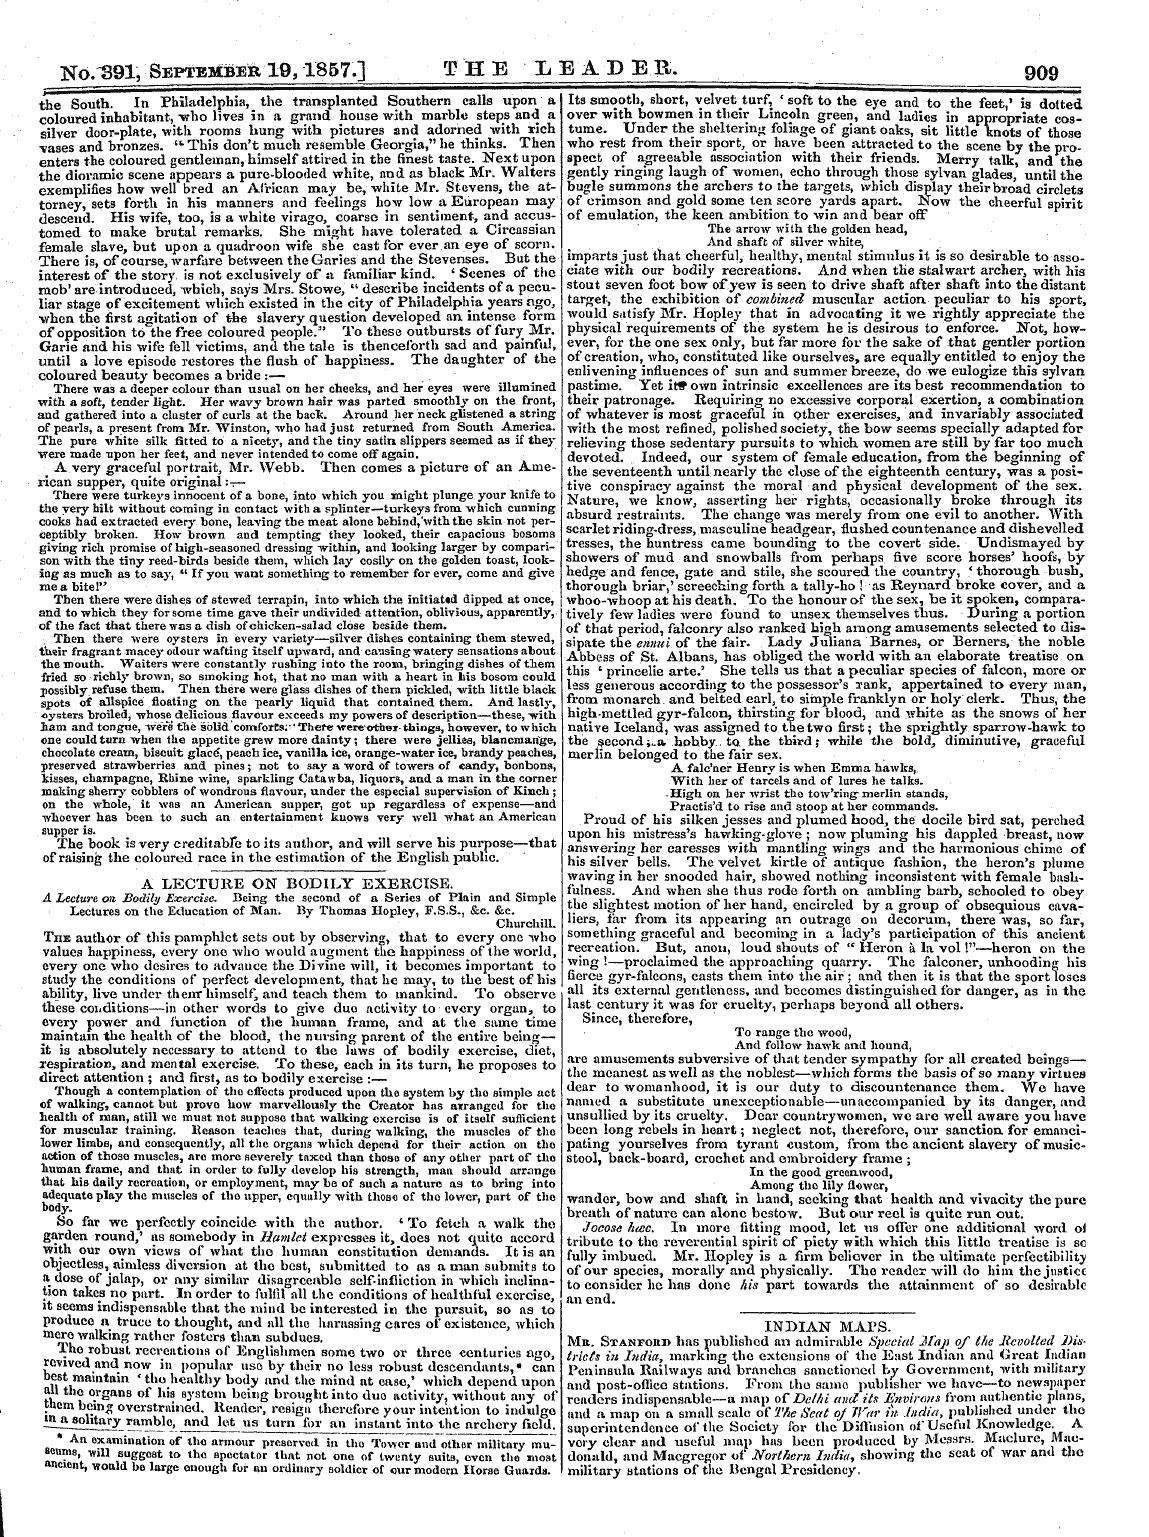 Leader (1850-1860): jS F Y, 2nd edition: 21